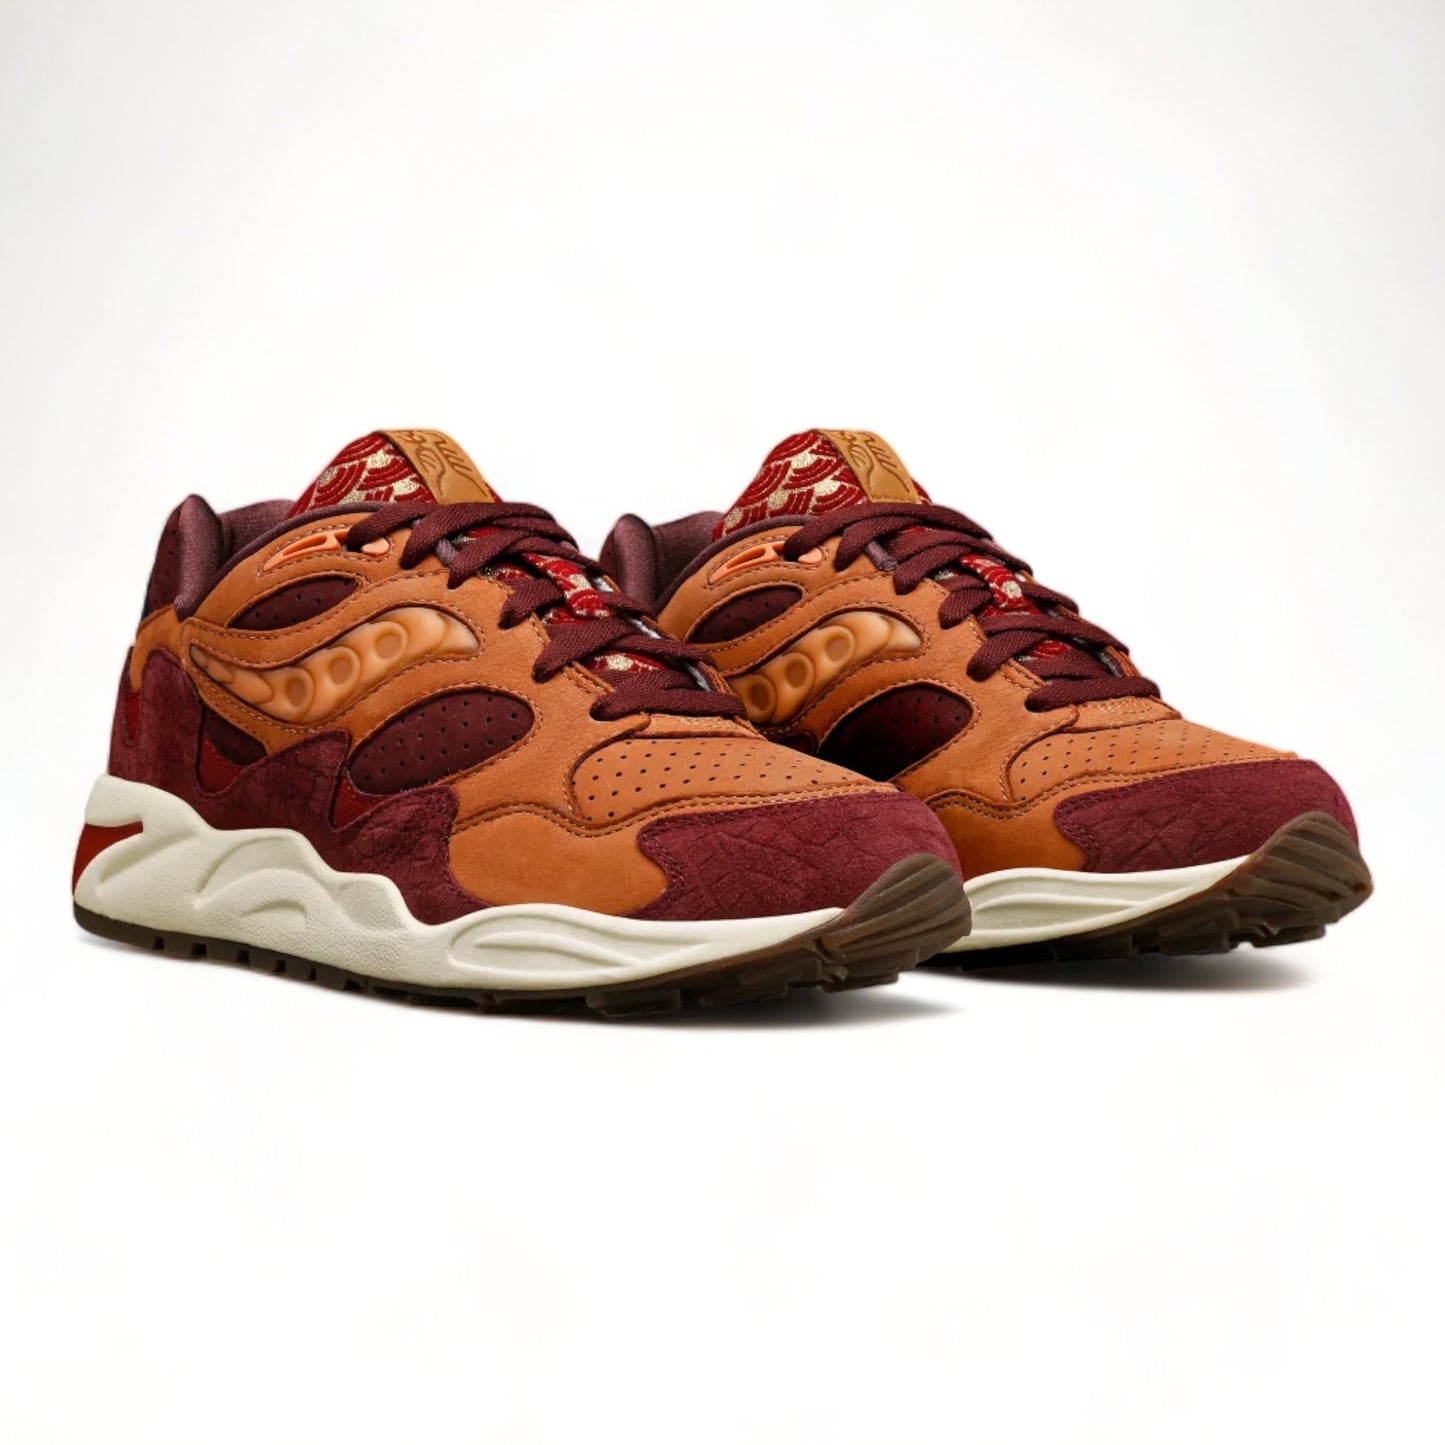 SAUCONY GRID SHADOW 2 'YEAR OF THE DRAGON'